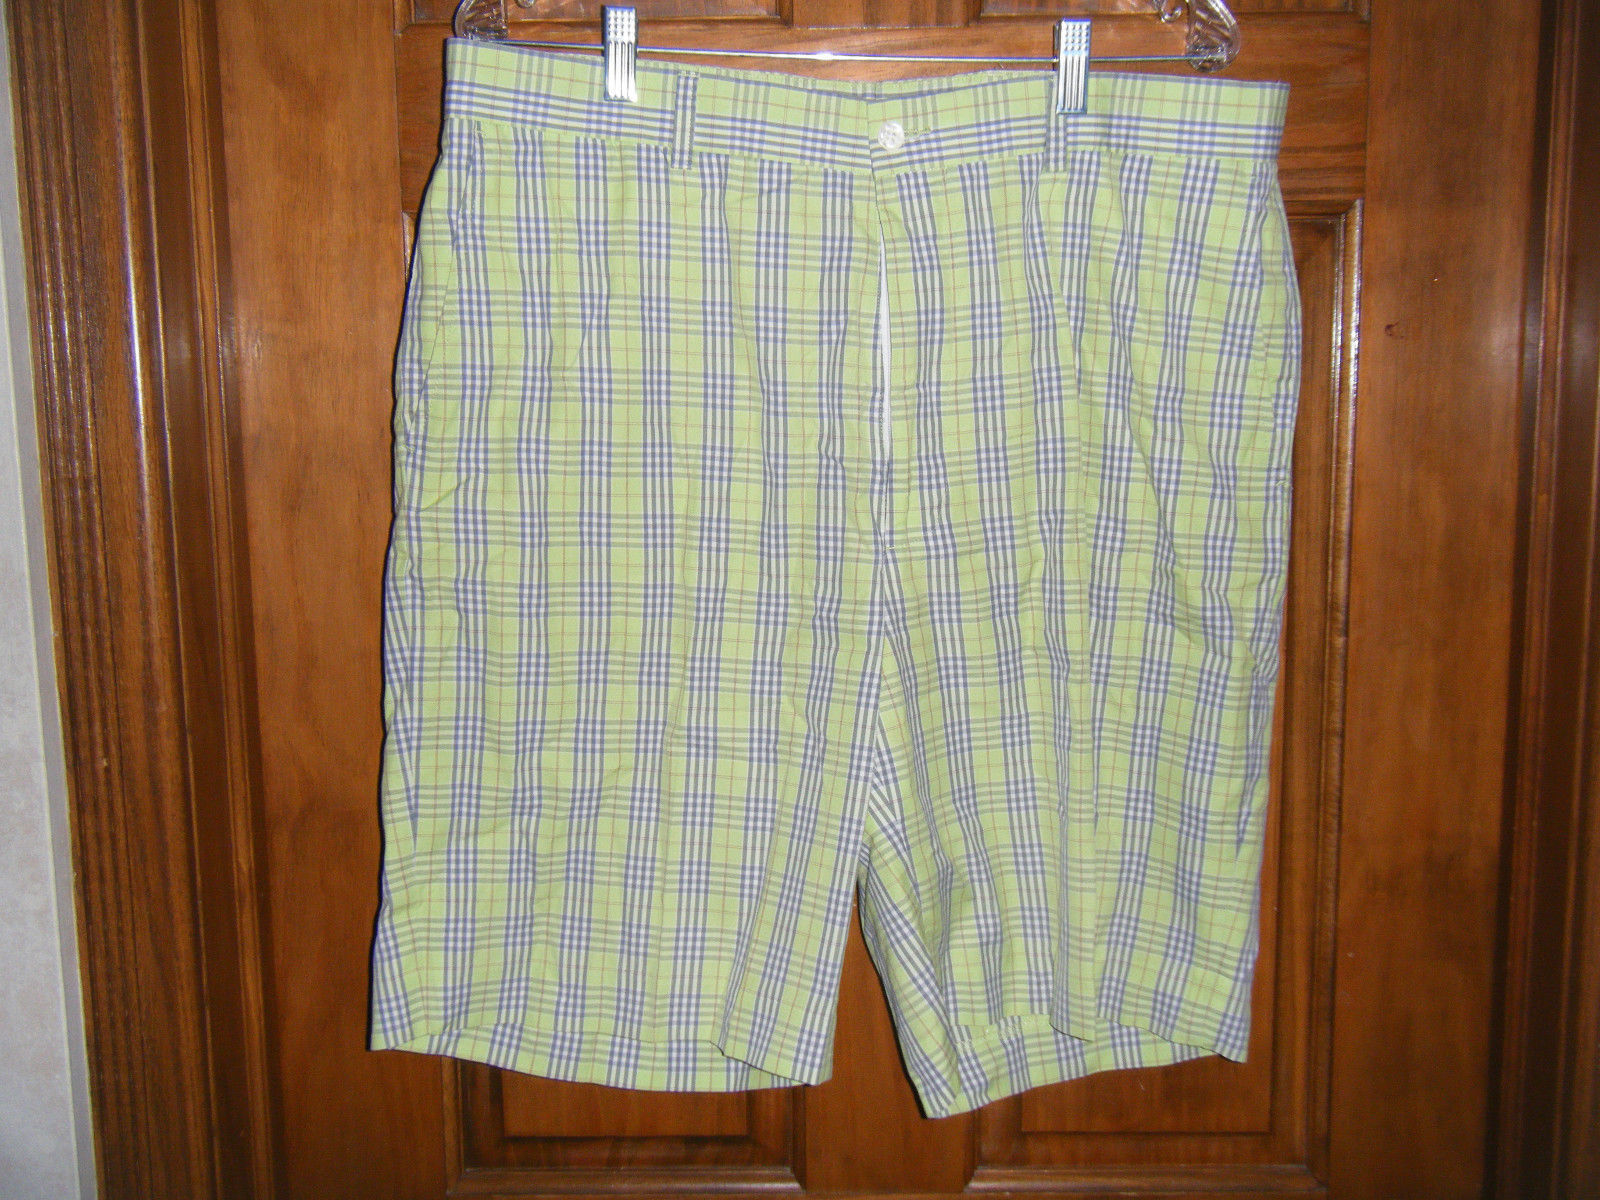 Primary image for Fairway & Greene Lime Green Plaid Golf Shorts - Size 36 Waist